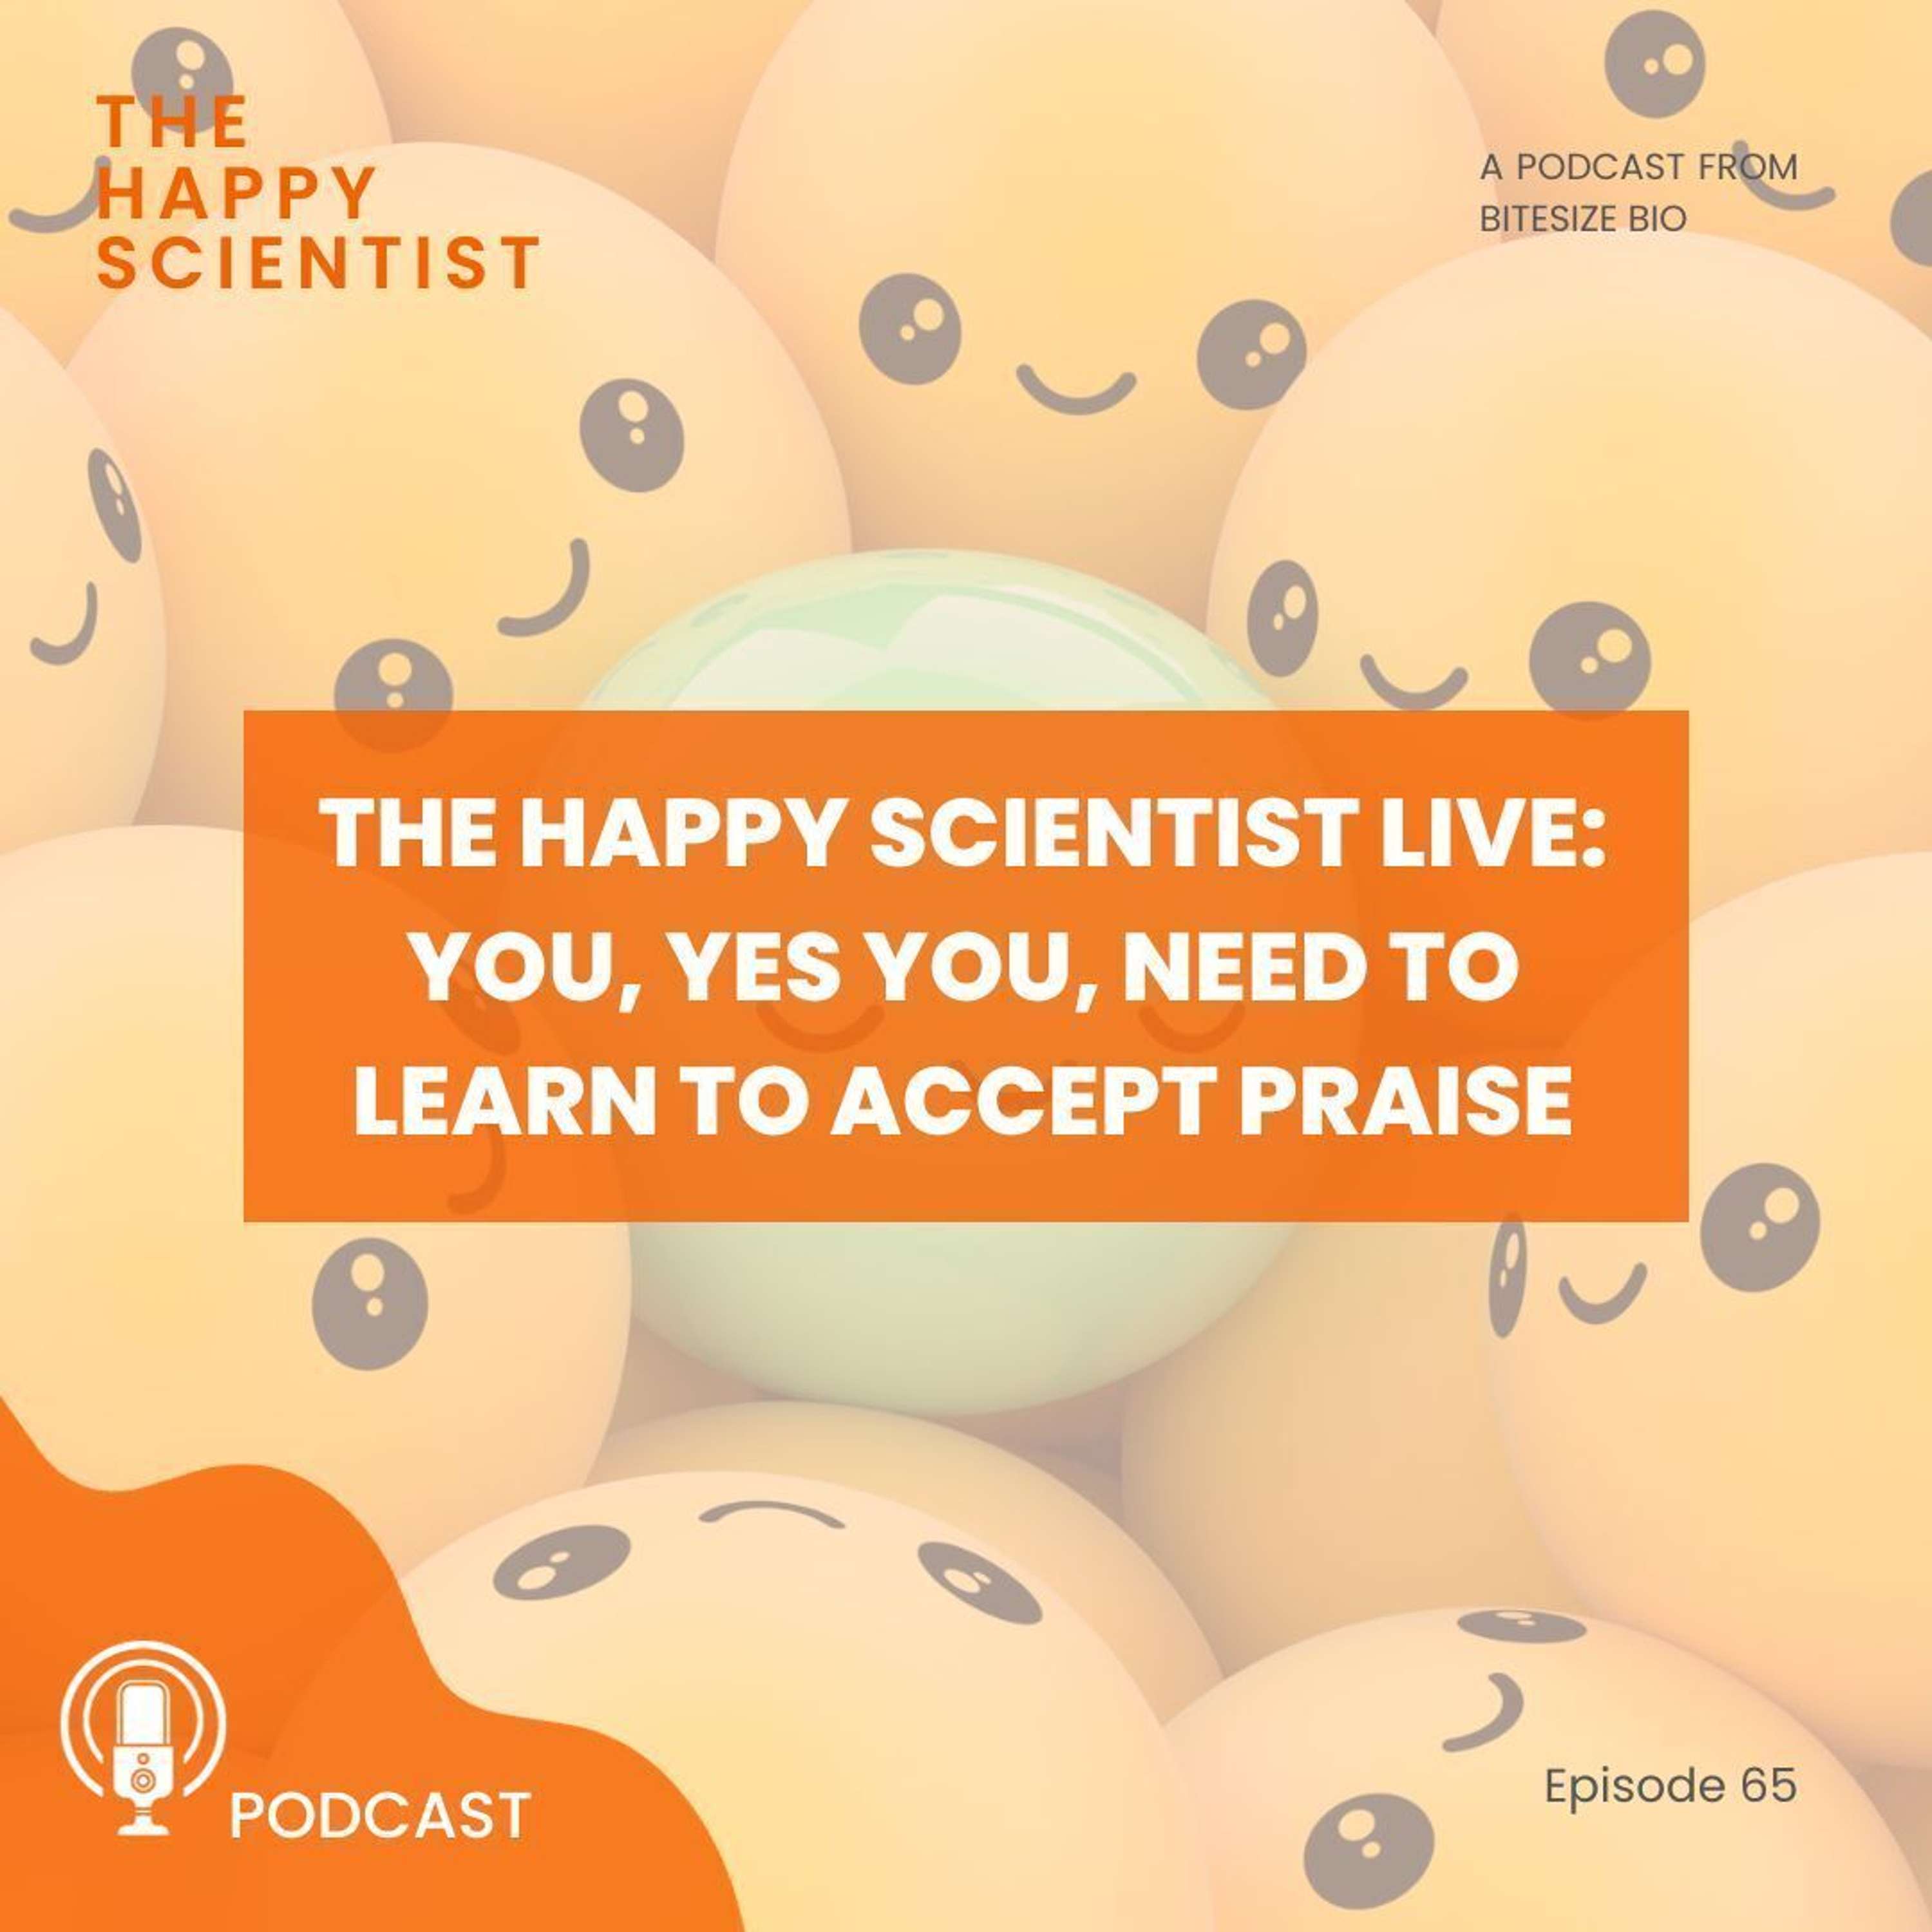 The Happy Scientist Live: You, Yes YOU, Need To Learn To Accept Praise